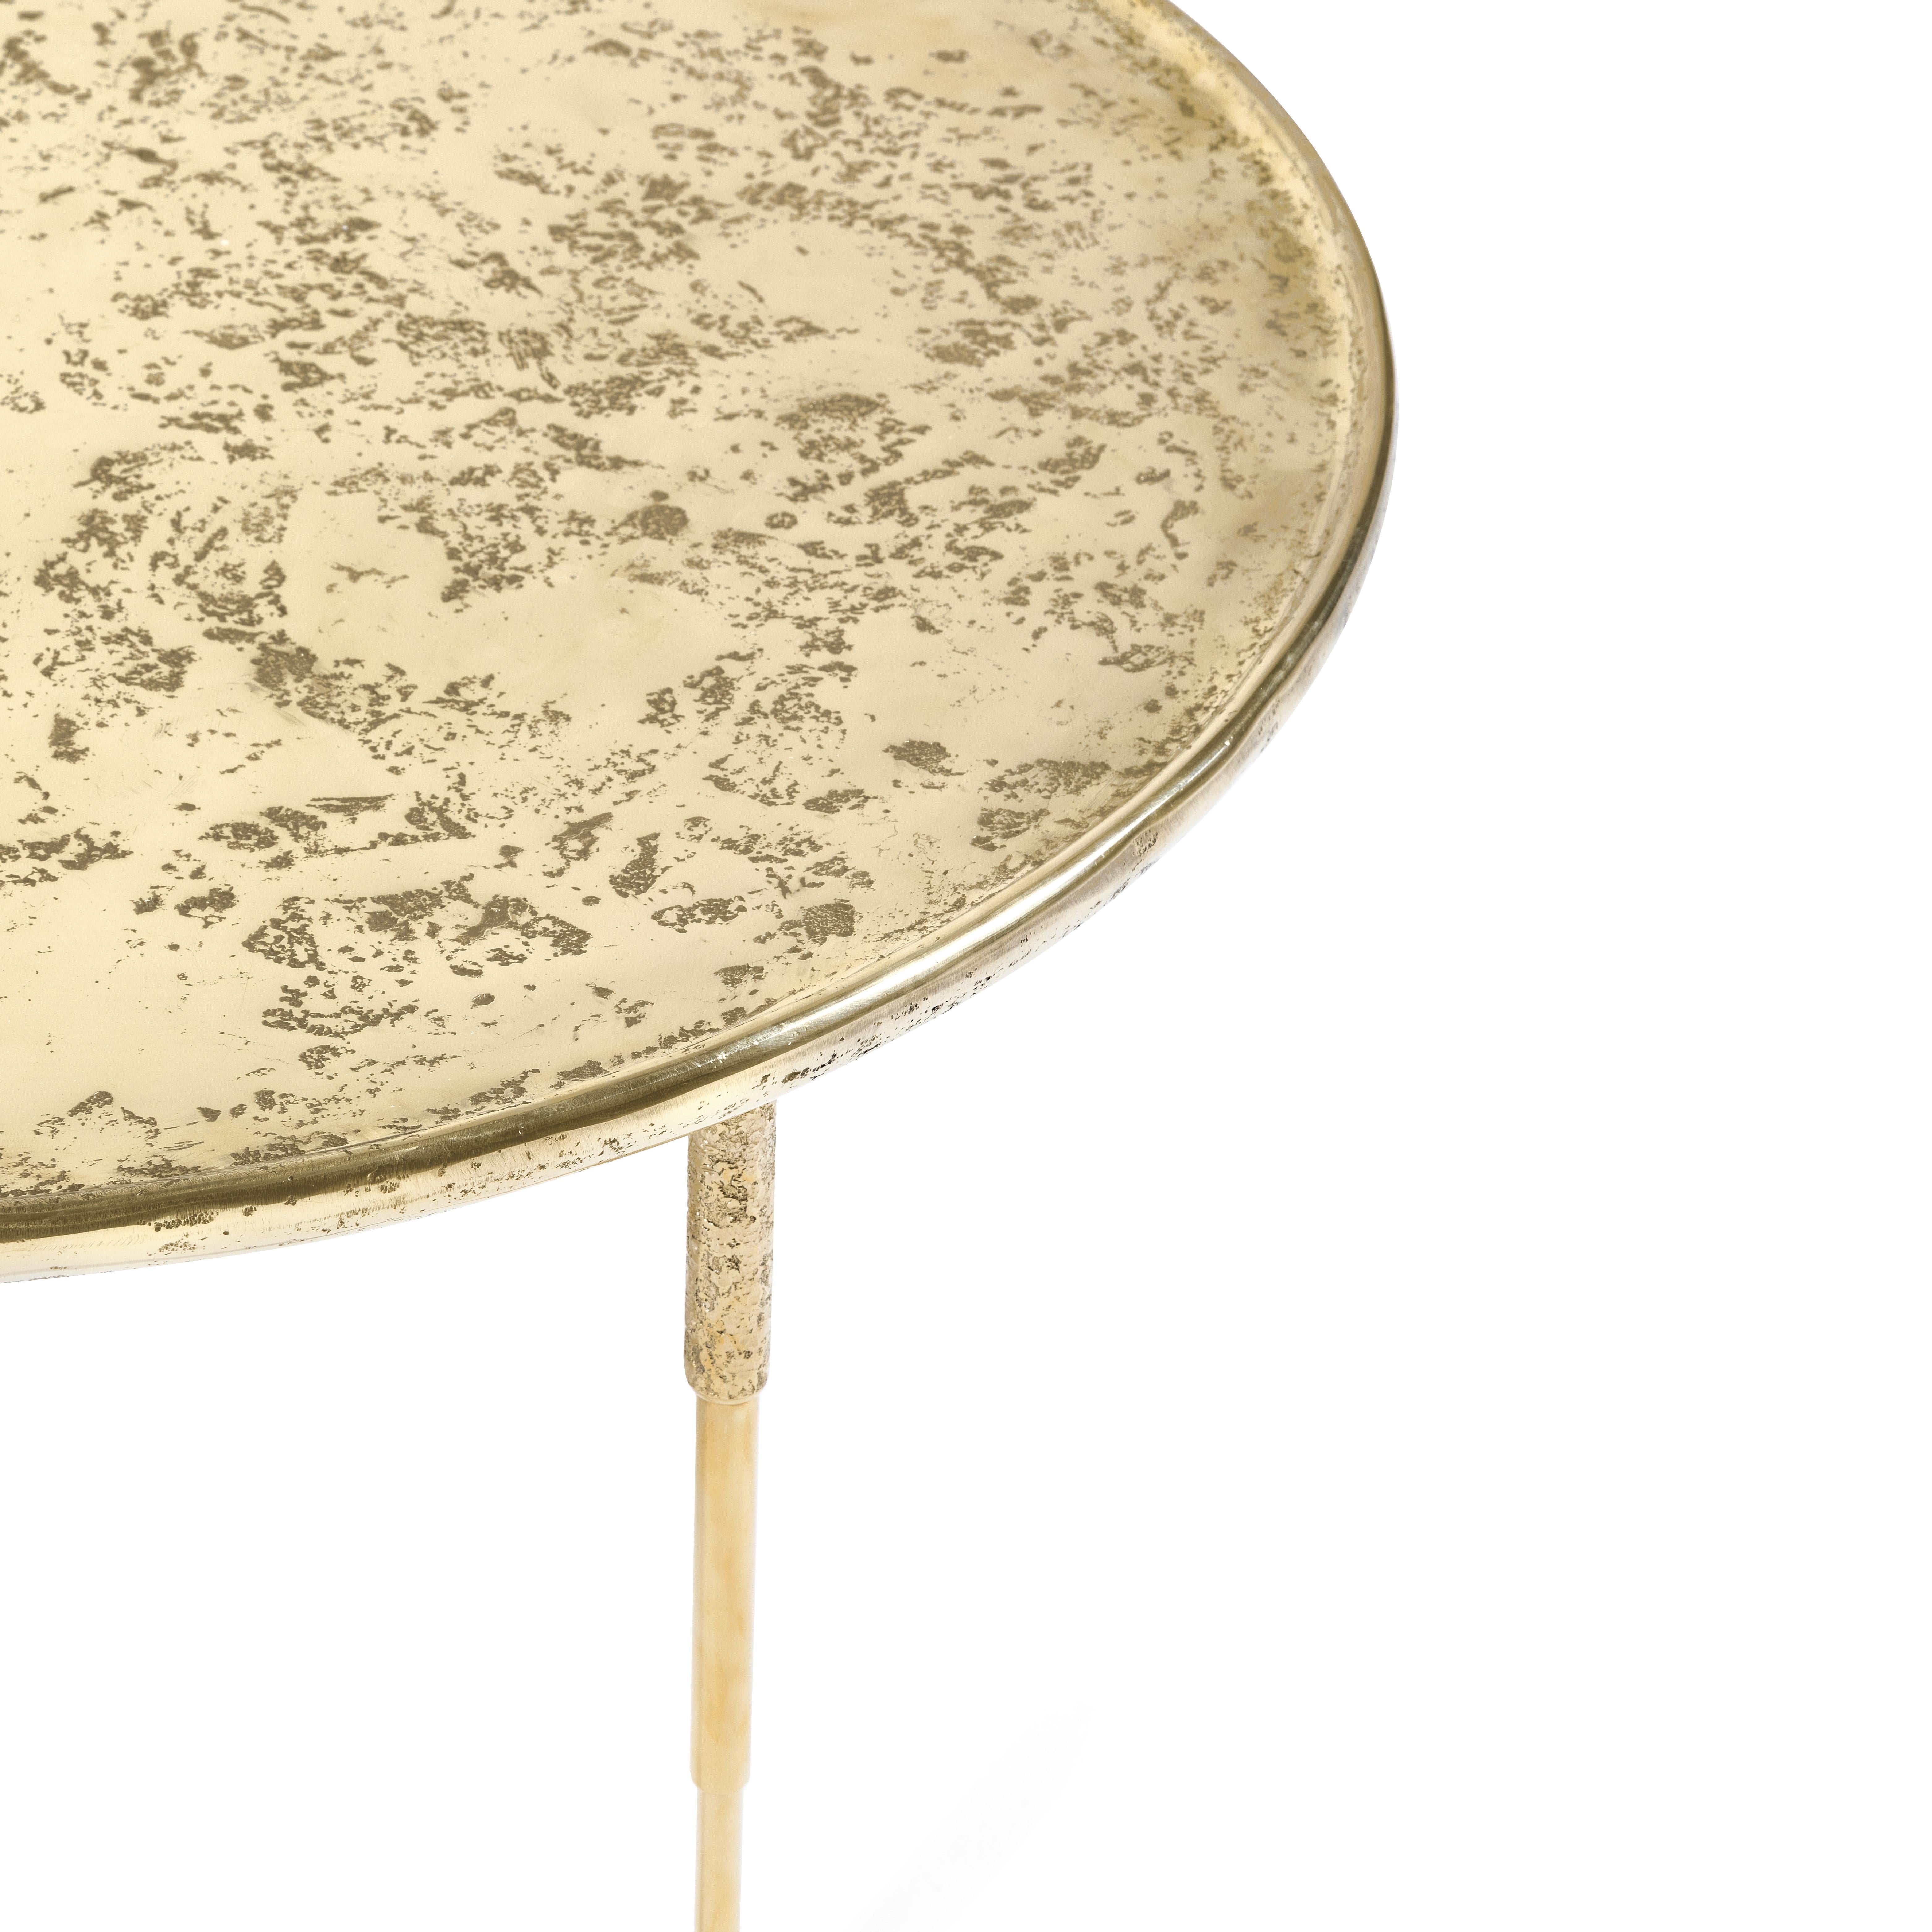 Side table Heron is a very refined element with a light and versatile design completely made of metal. The brass top is obtained through the traditional sand casting technique, which consists in pouring the liquid metal into a mold made of special